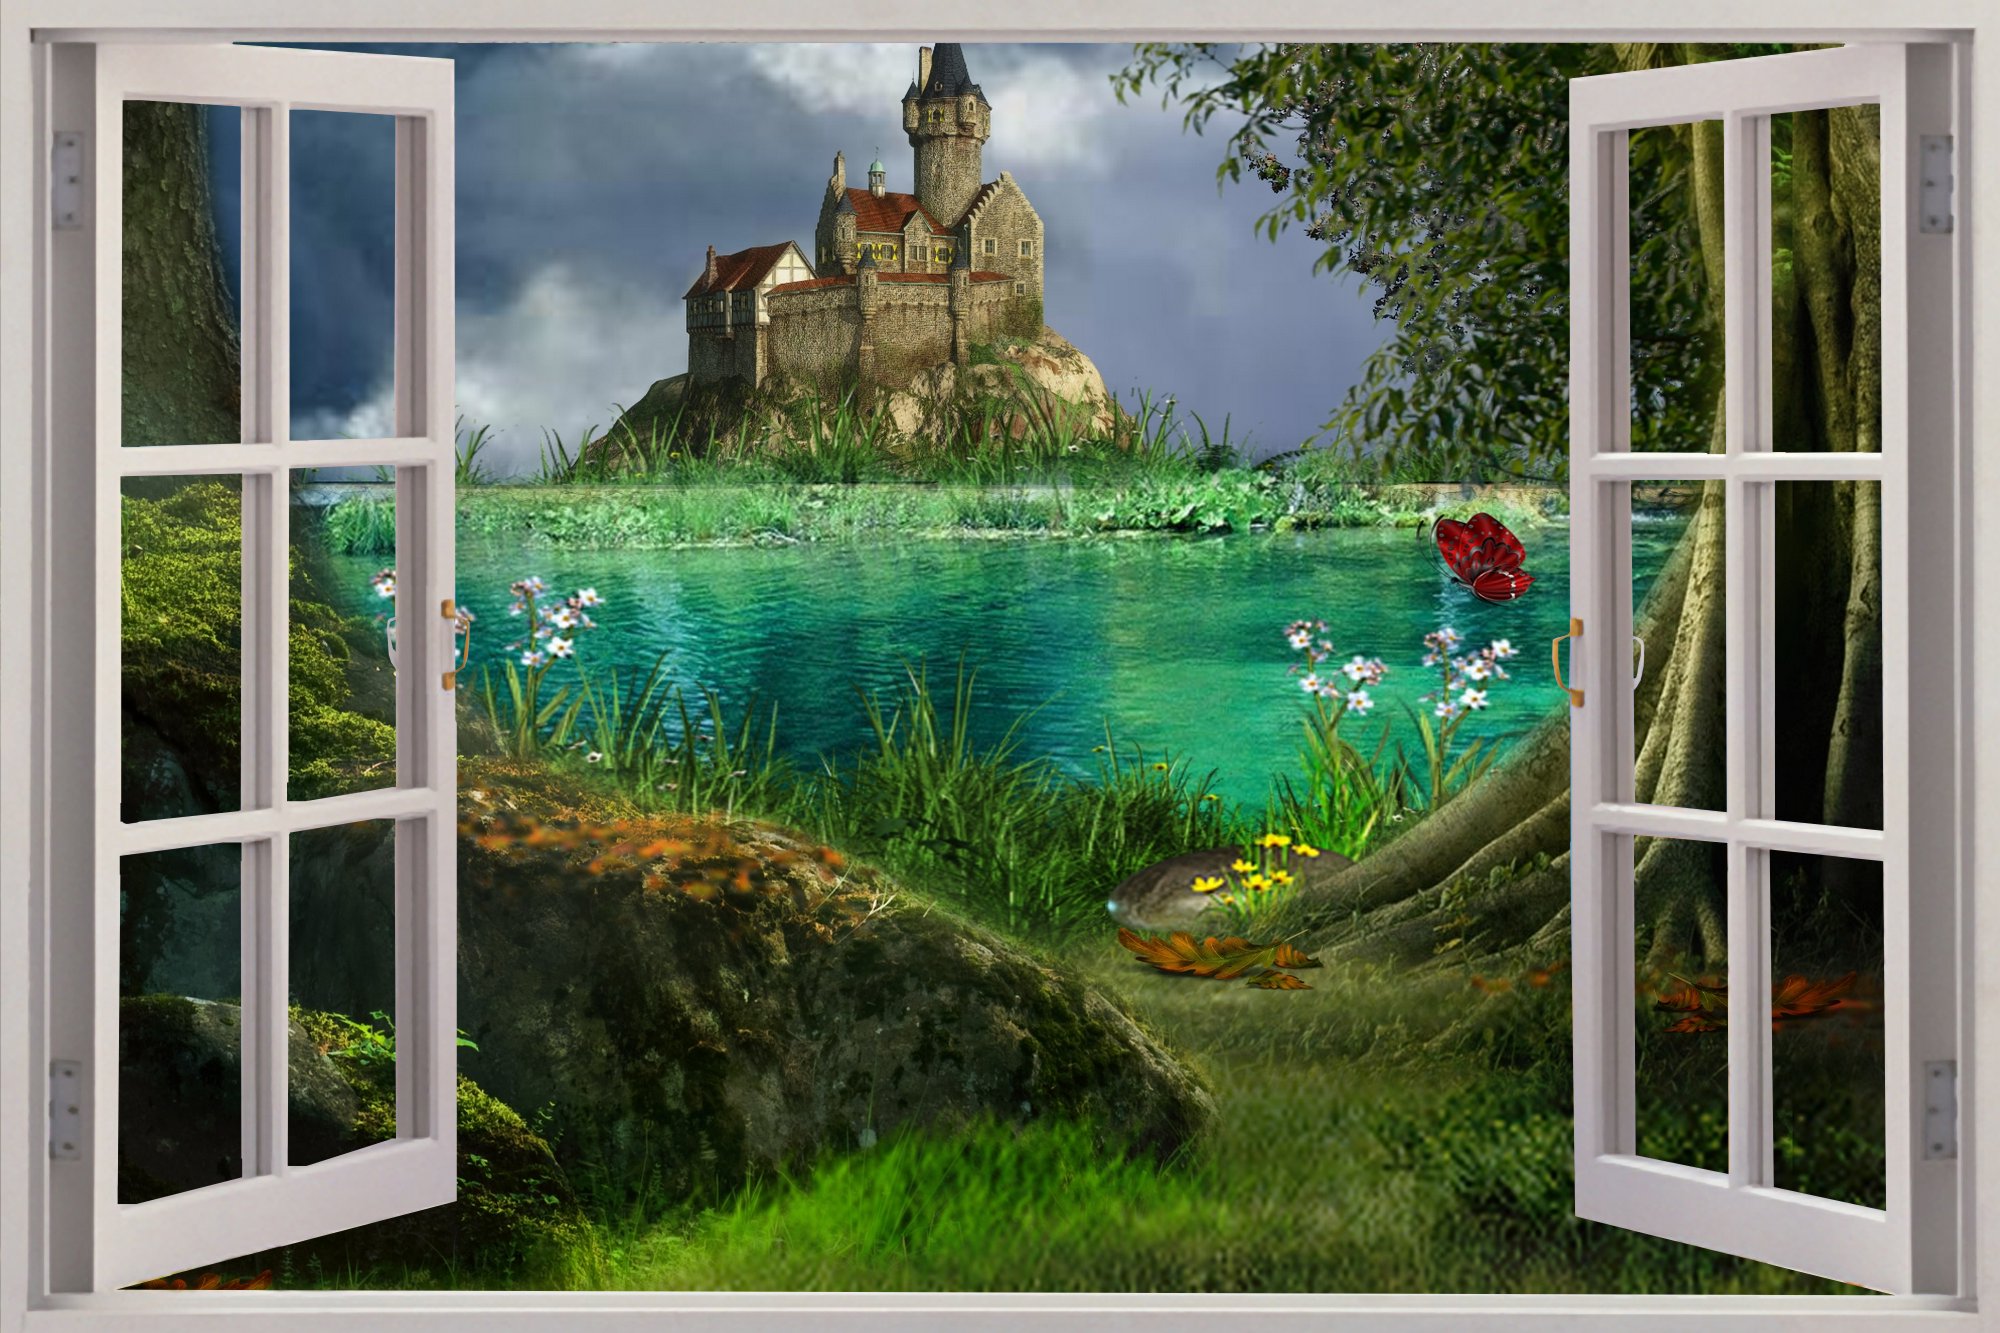 Details about Huge 3D Window Enchanted Castle View Wall Stickers Mural 2000x1333